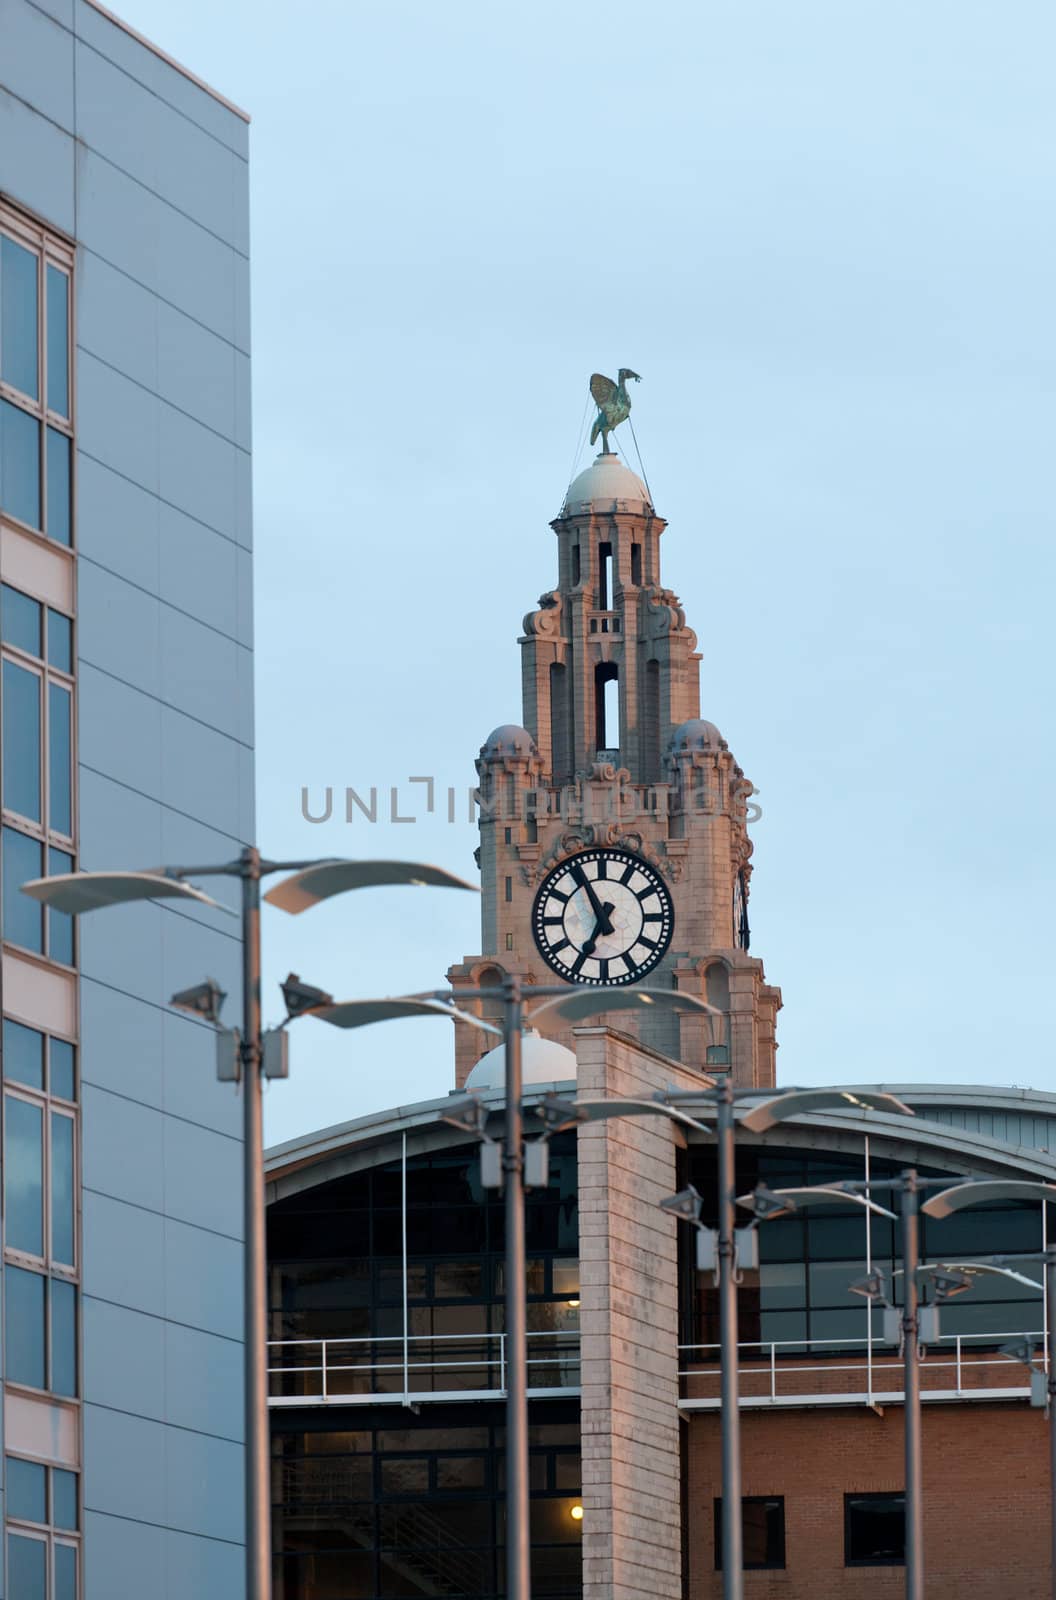 Liver building on waterfront in Liverpool, England with modern building in foreground